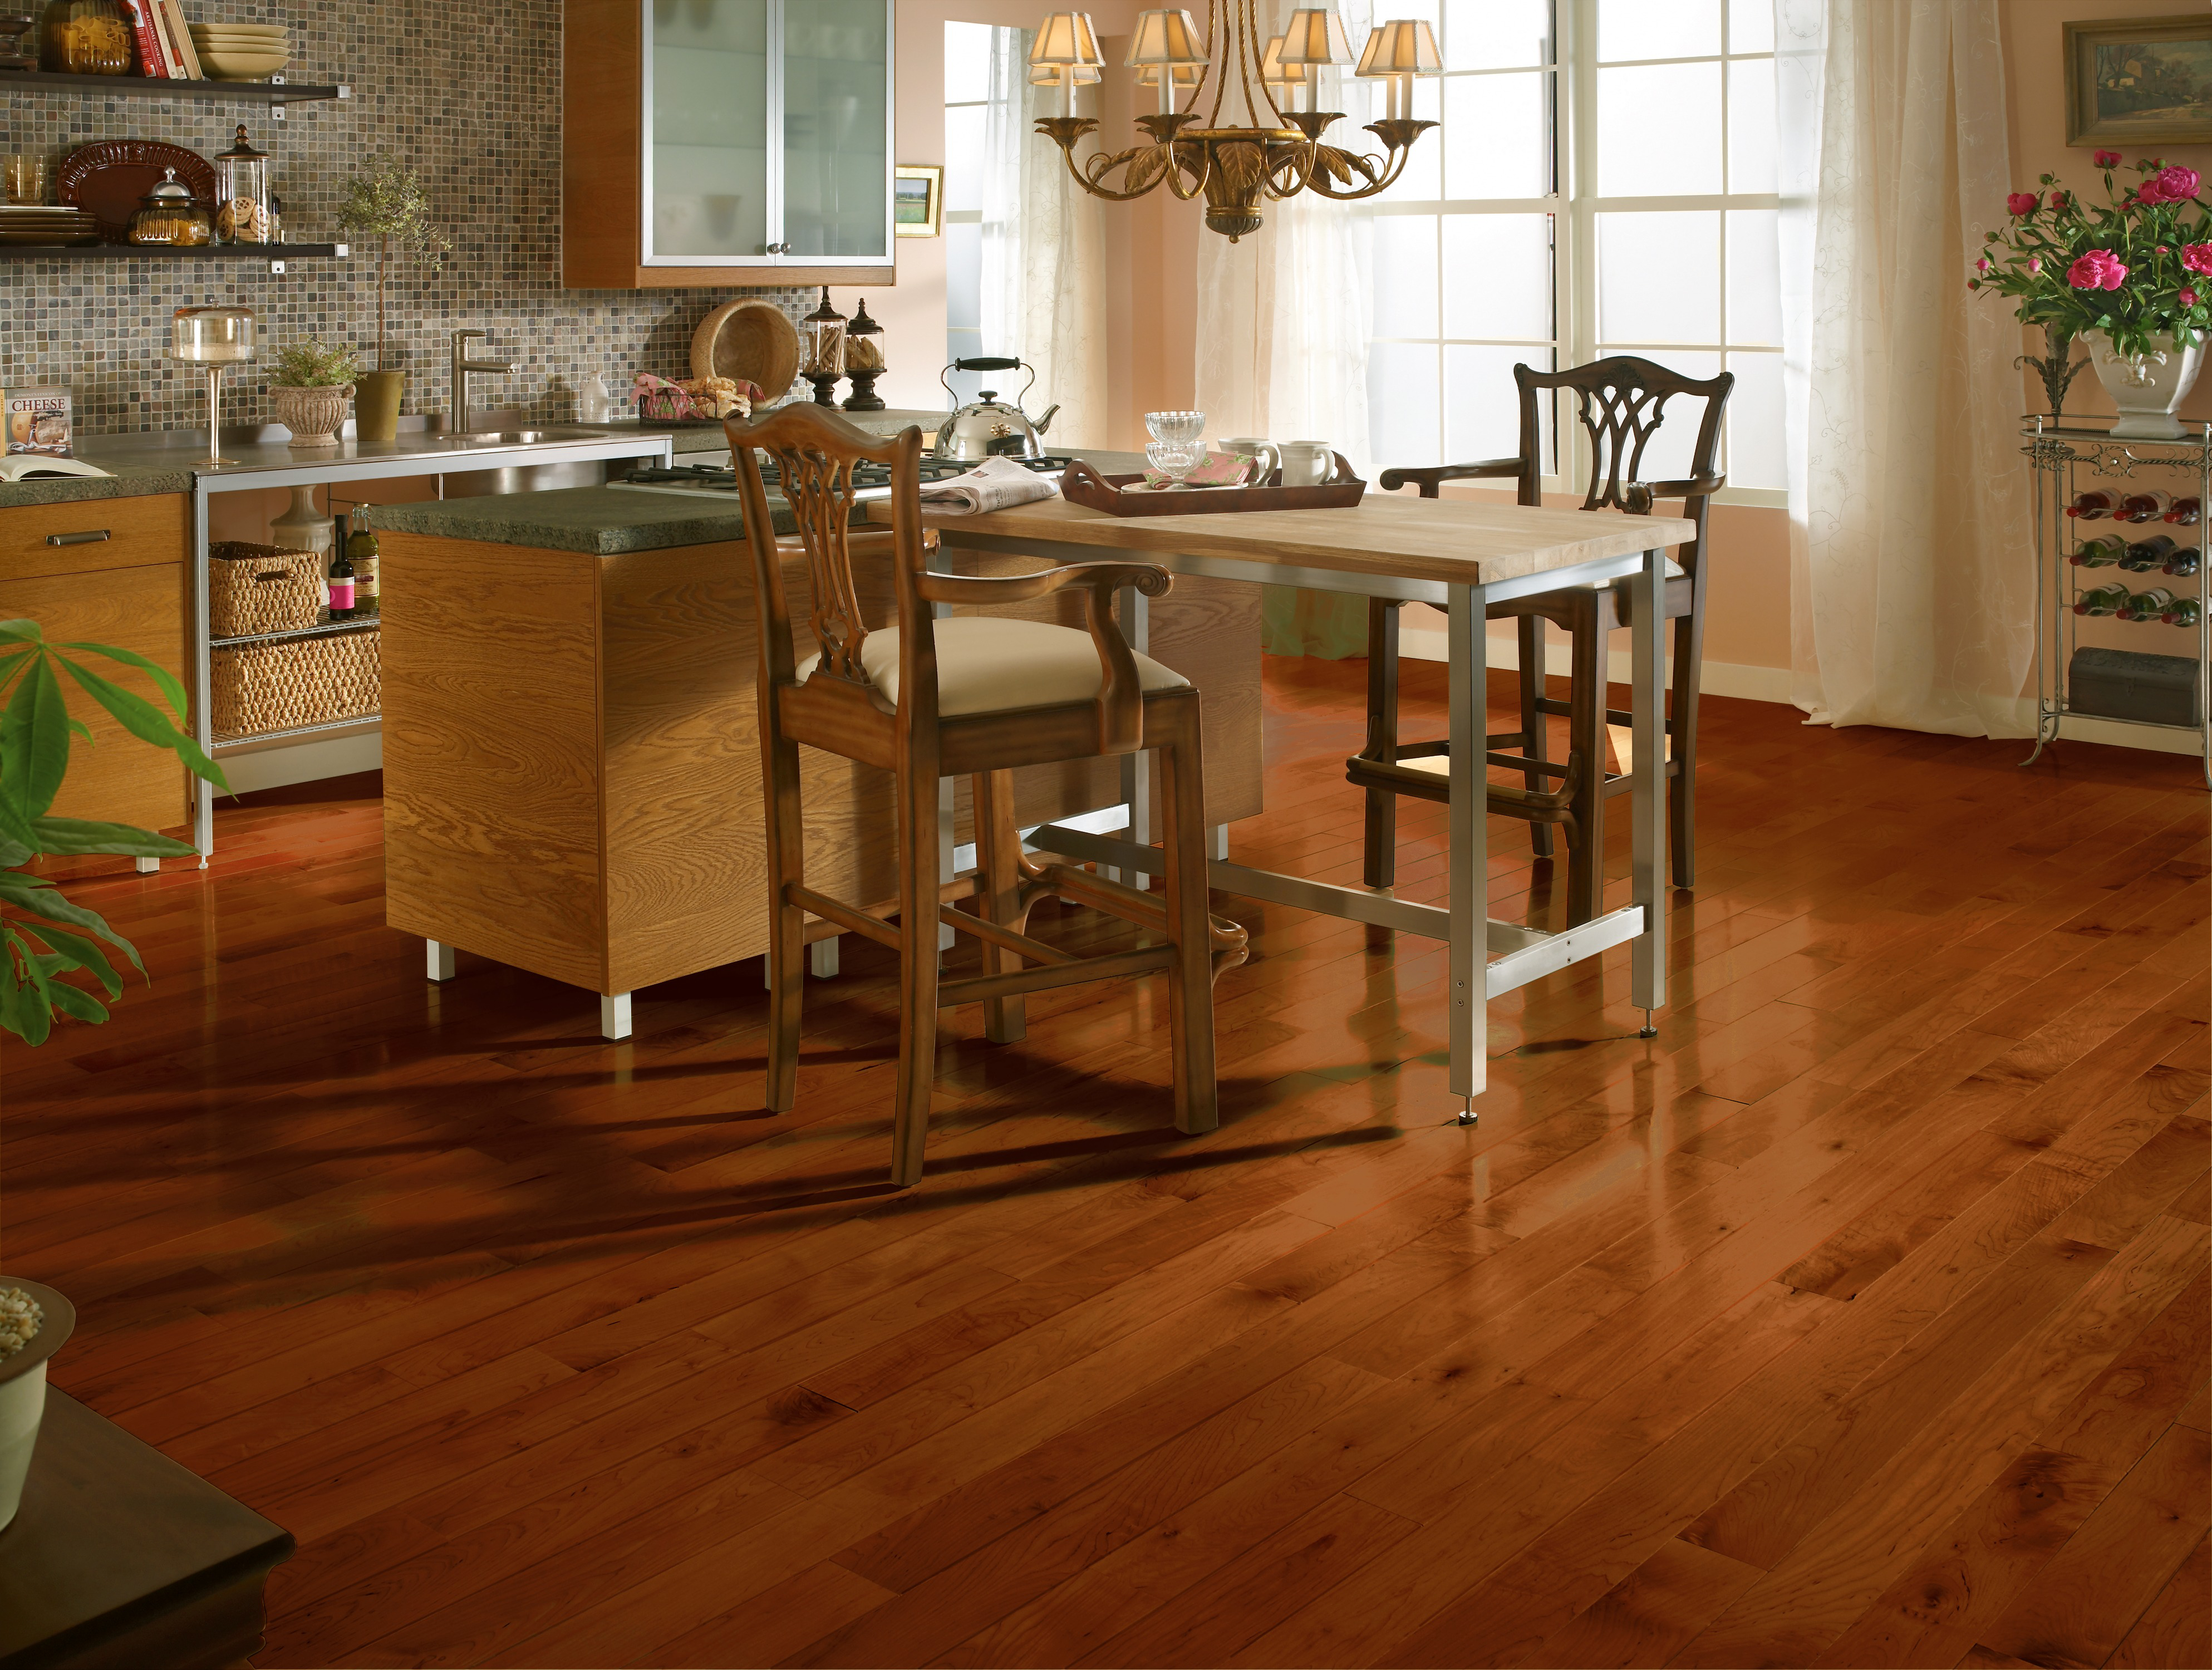 Kennedale Cherry Solid Hardwood CM4728